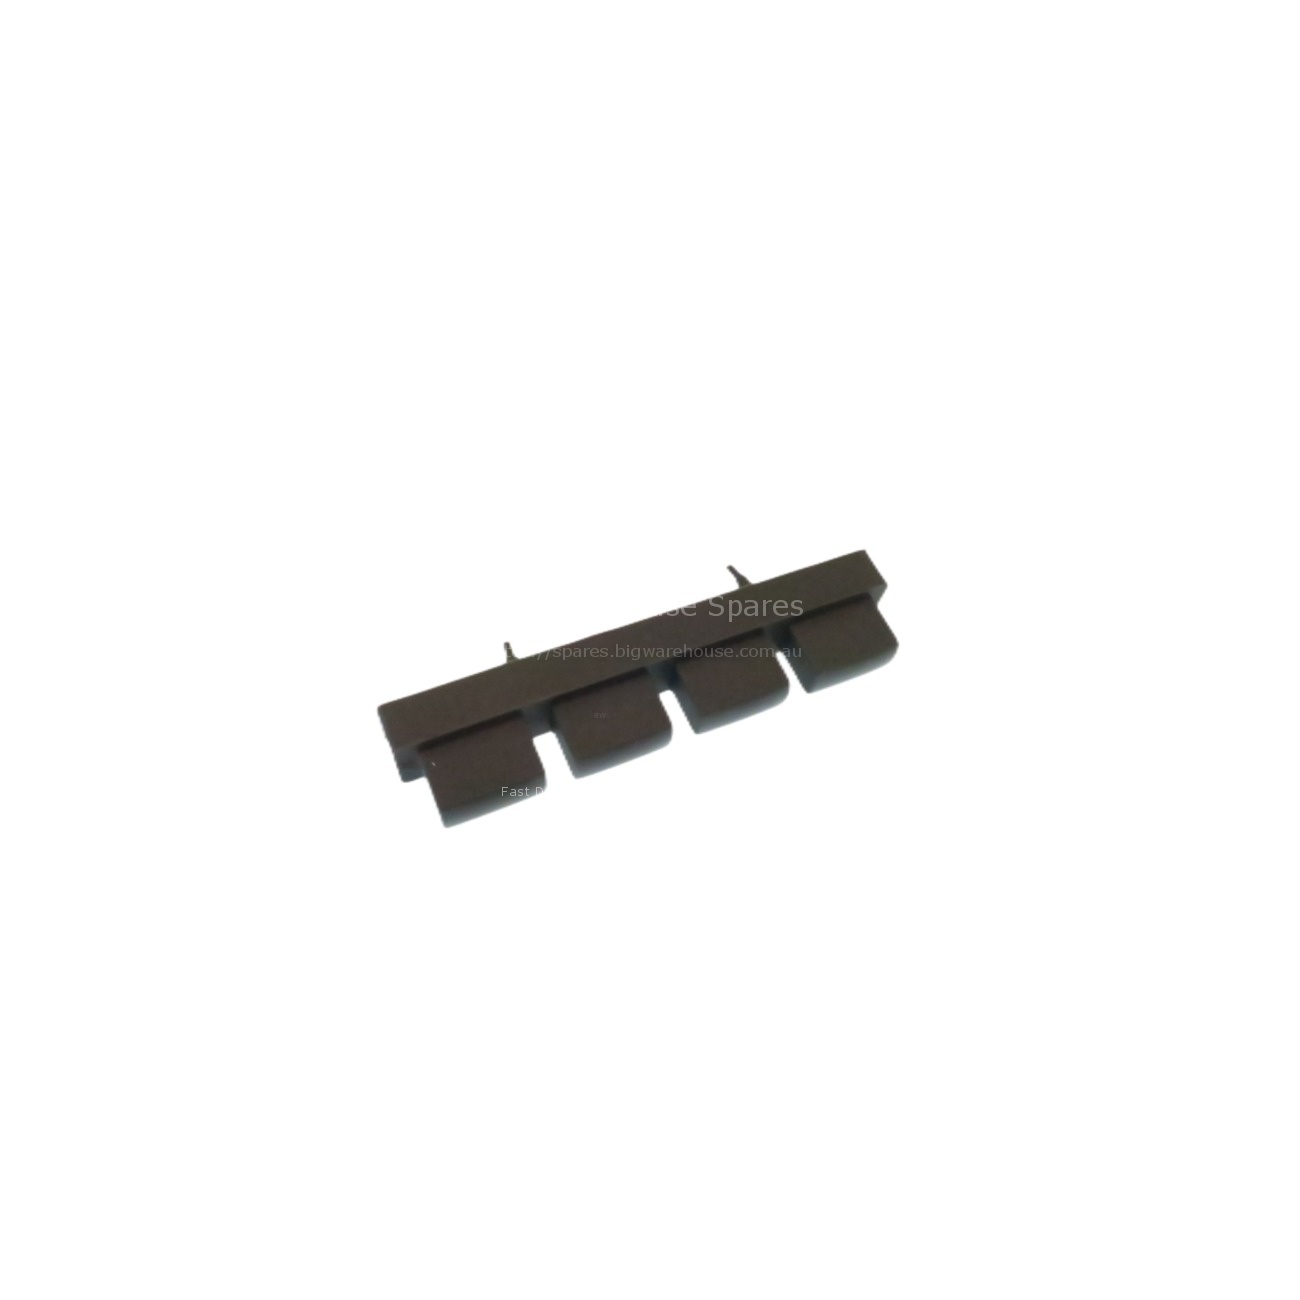 4-BUTTON ASSEMBLY FOR G/S PUSHBUTTON PAN